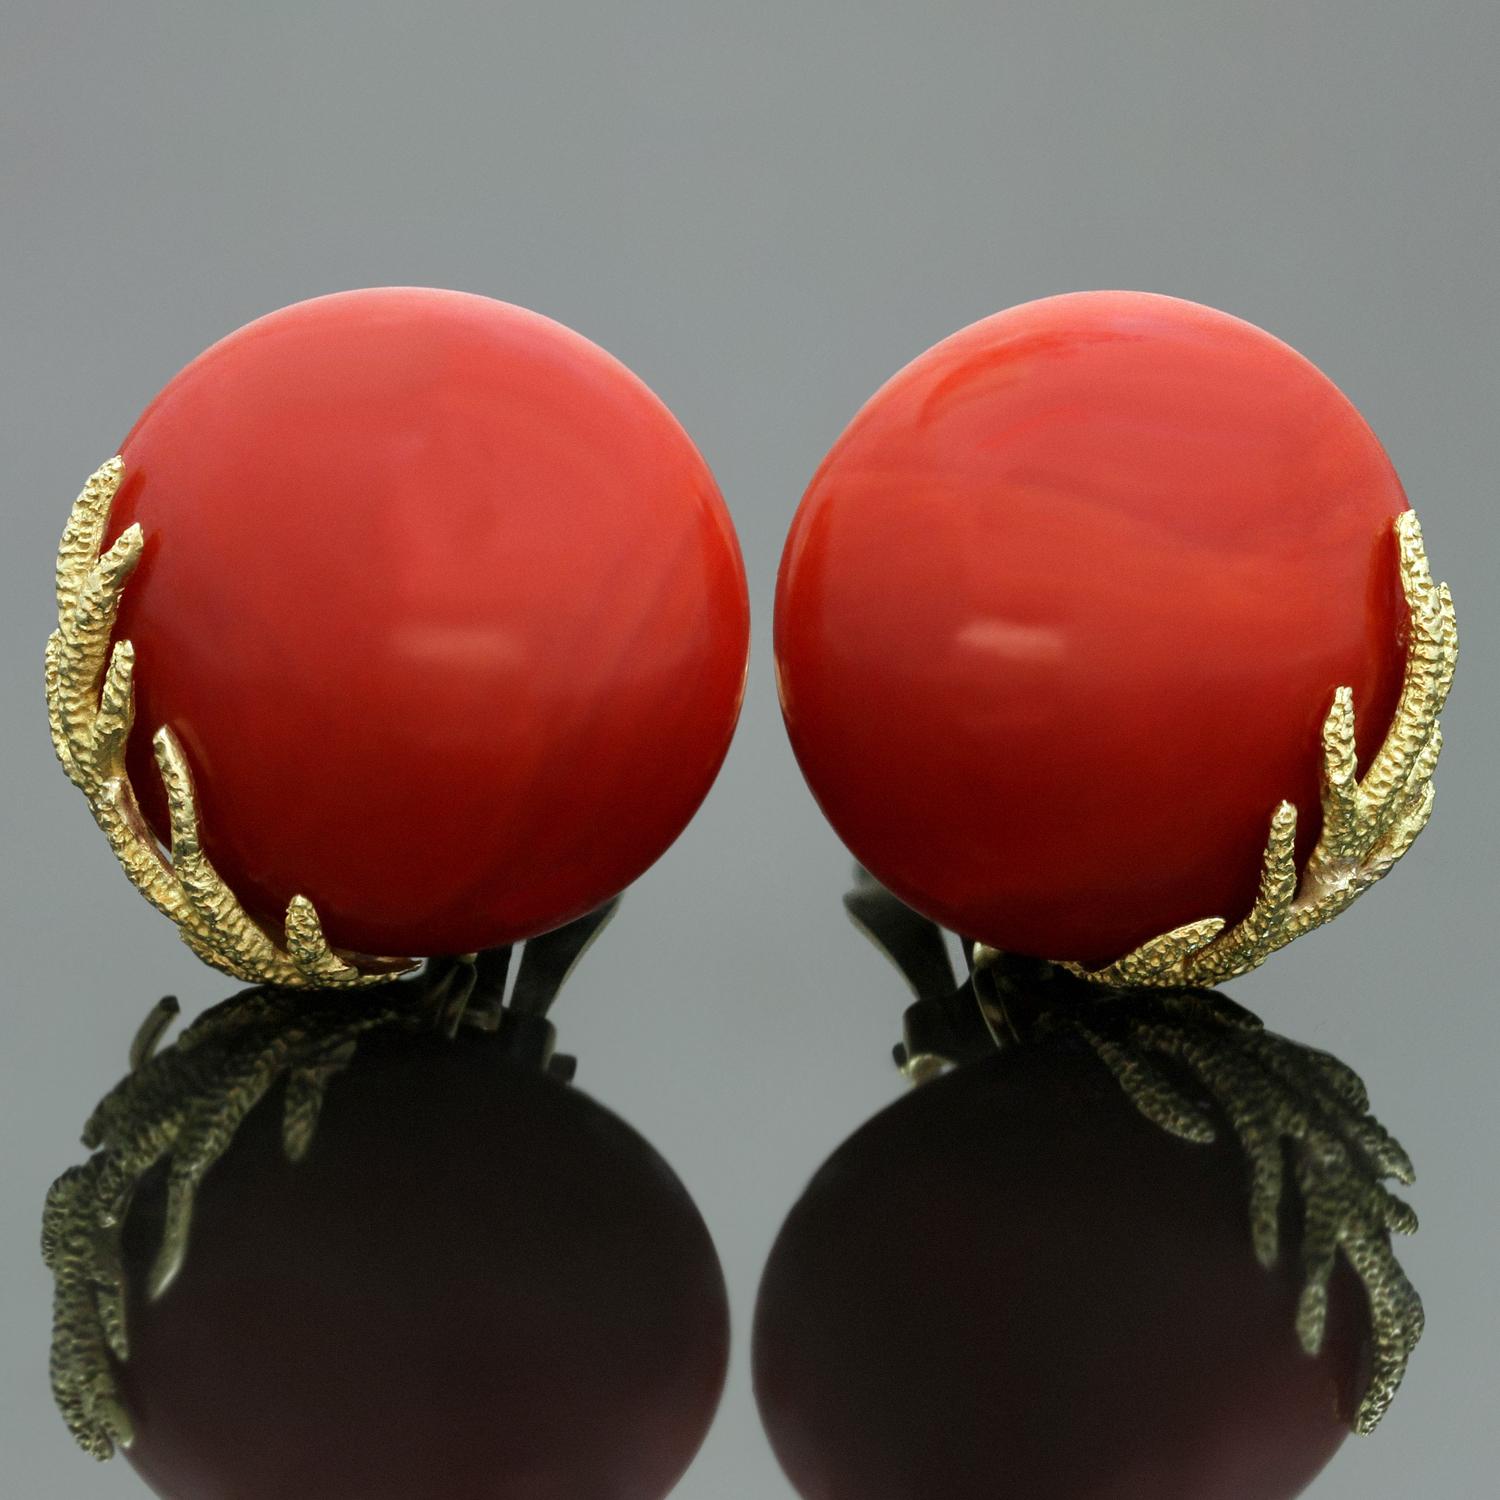 These stunning vintage clip-on earrings feature rouna natural oxblood corals with textured 18k yellow gold accents and 14k gold lever-backs. Made in United States circa 1960s. Measurements: 0.86